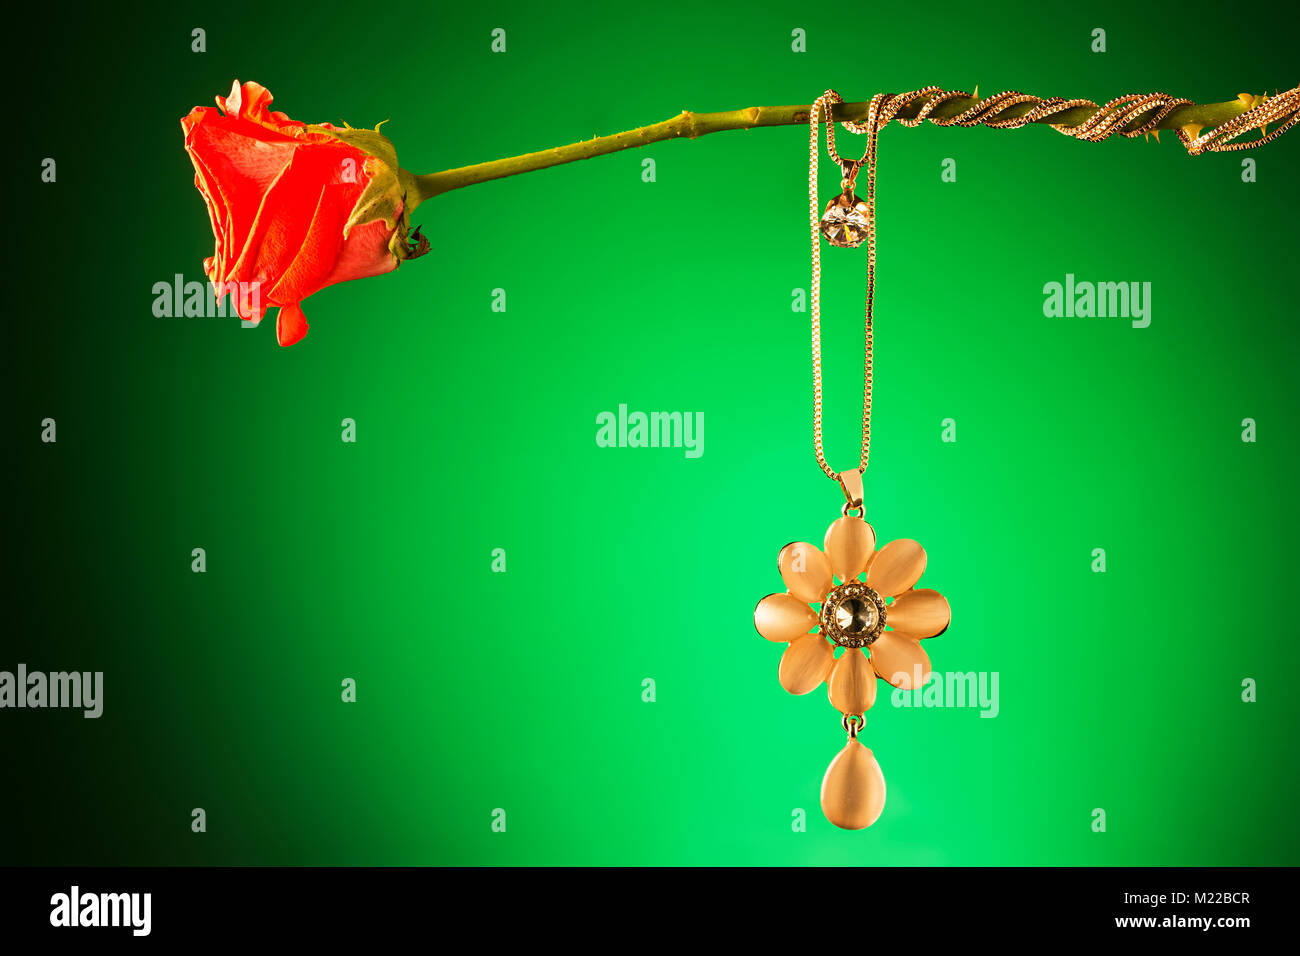 Expensive Jewellery Necklace Chain And Pendant Hanging Ornaments Flower Stem Stock Photo